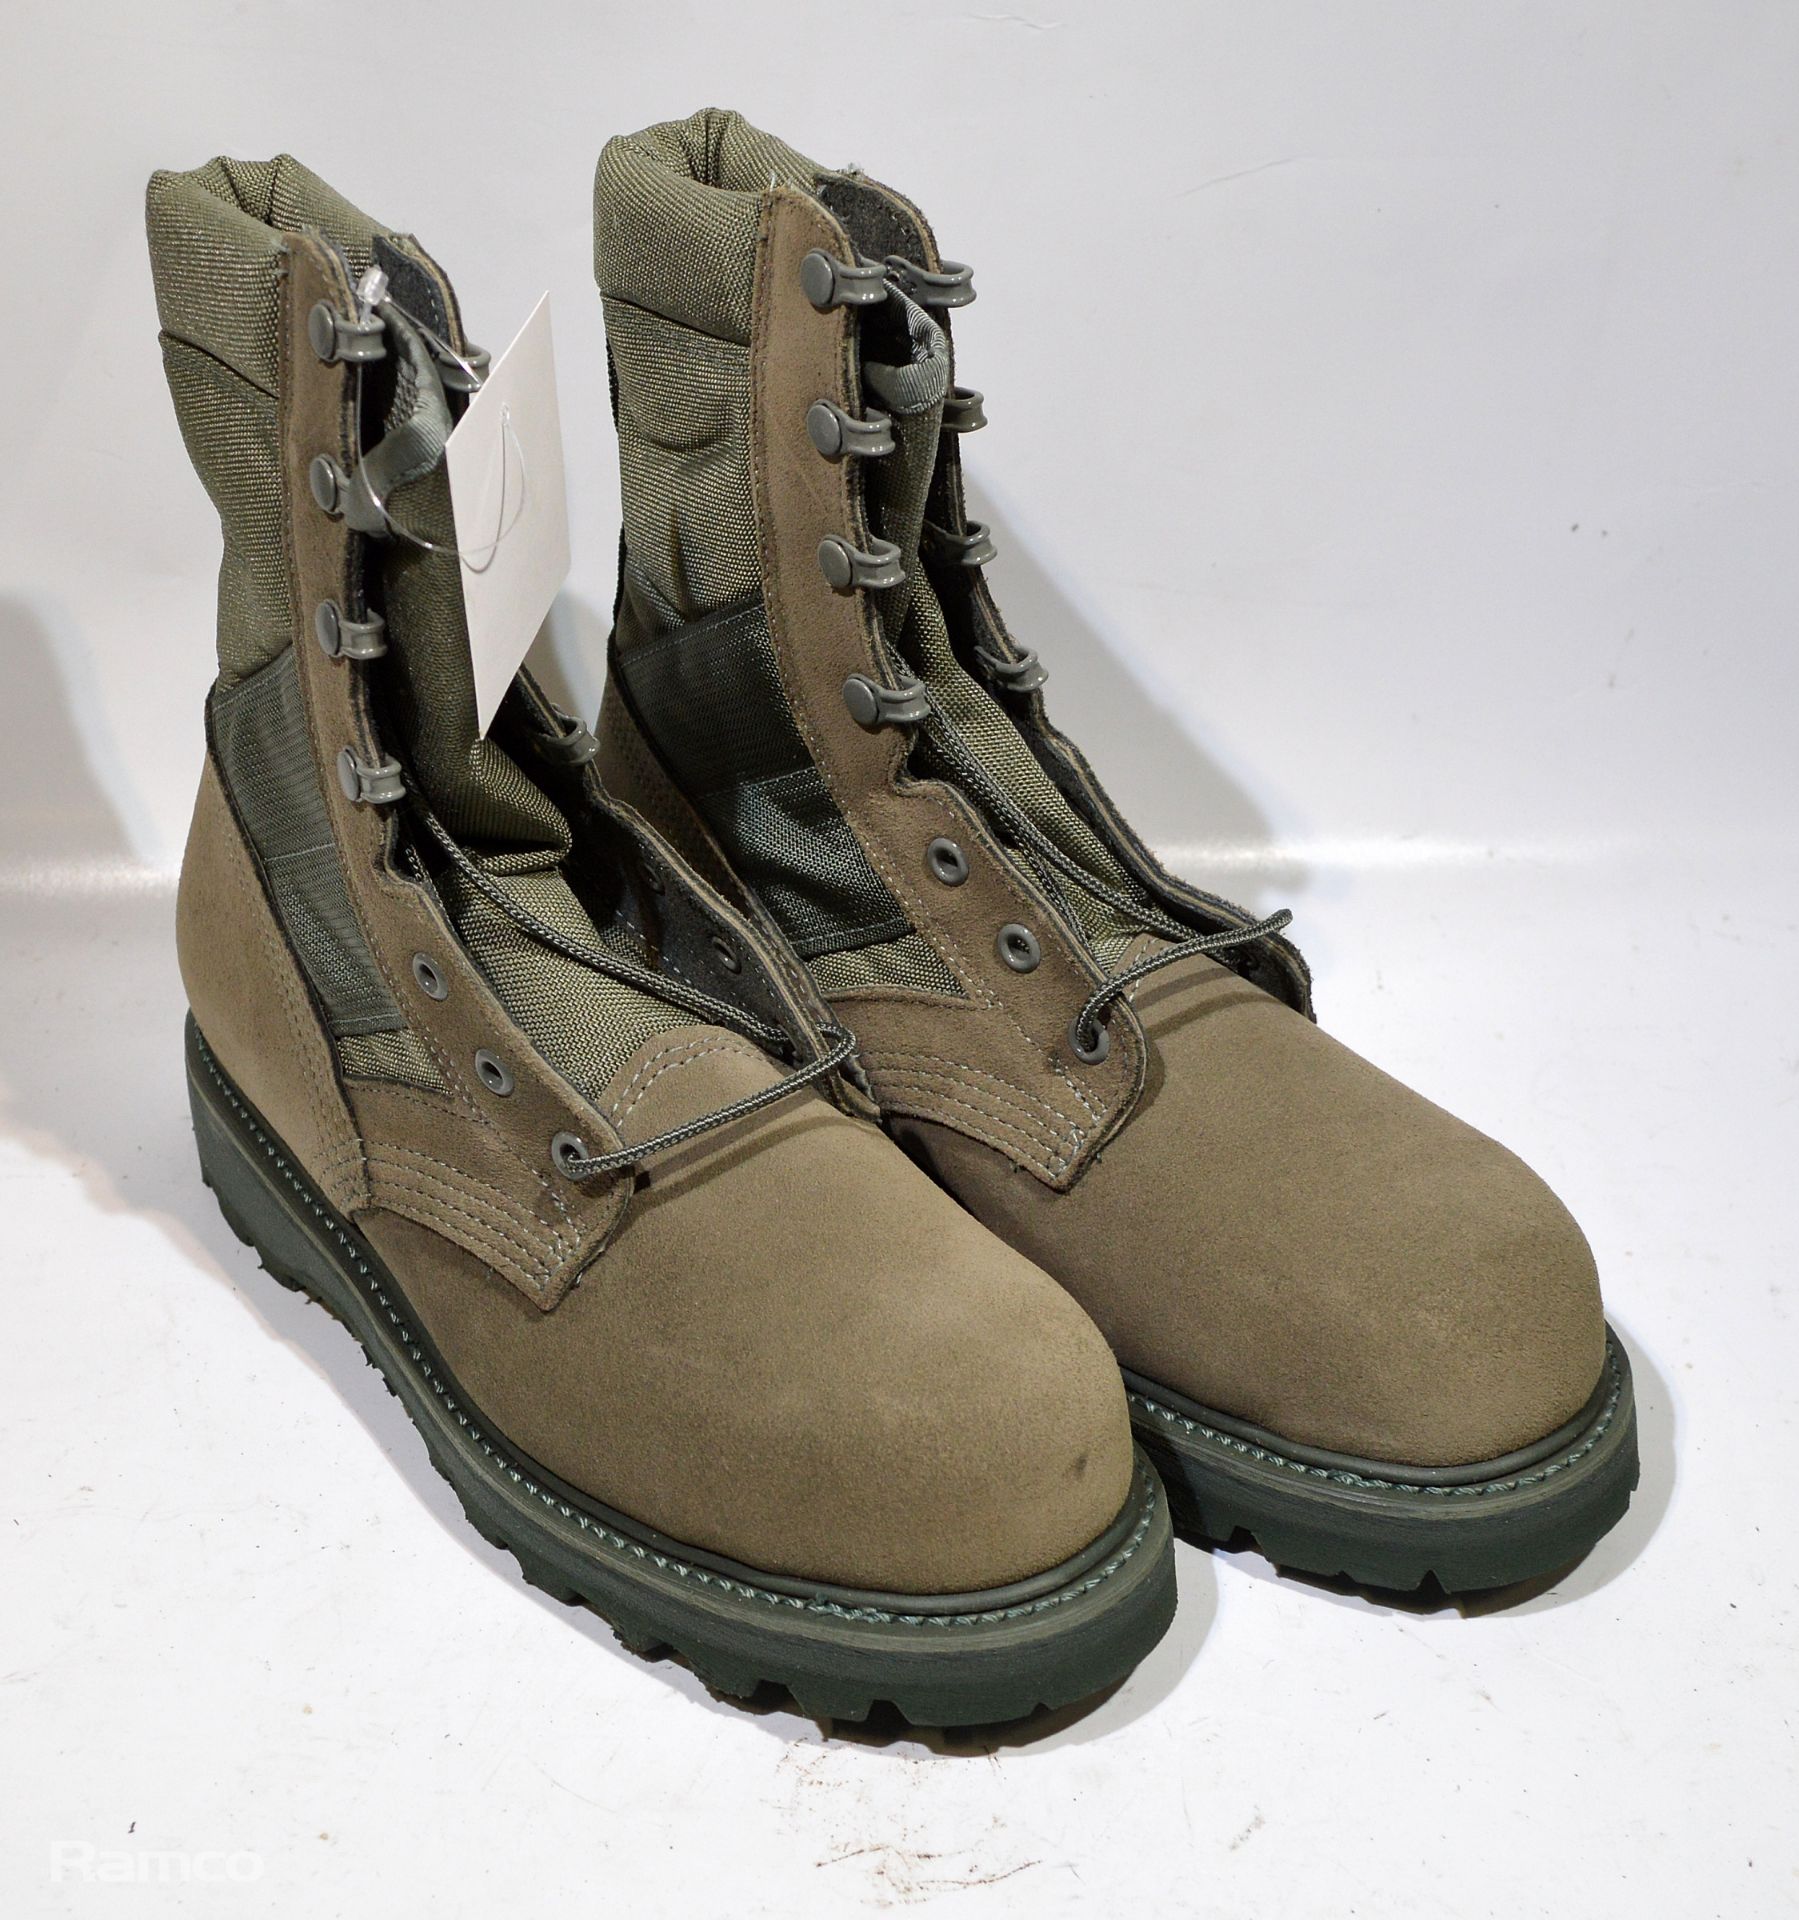 Thorogood Hot Weather Boots - 3 pairs - 6 1/2W - Image 2 of 3